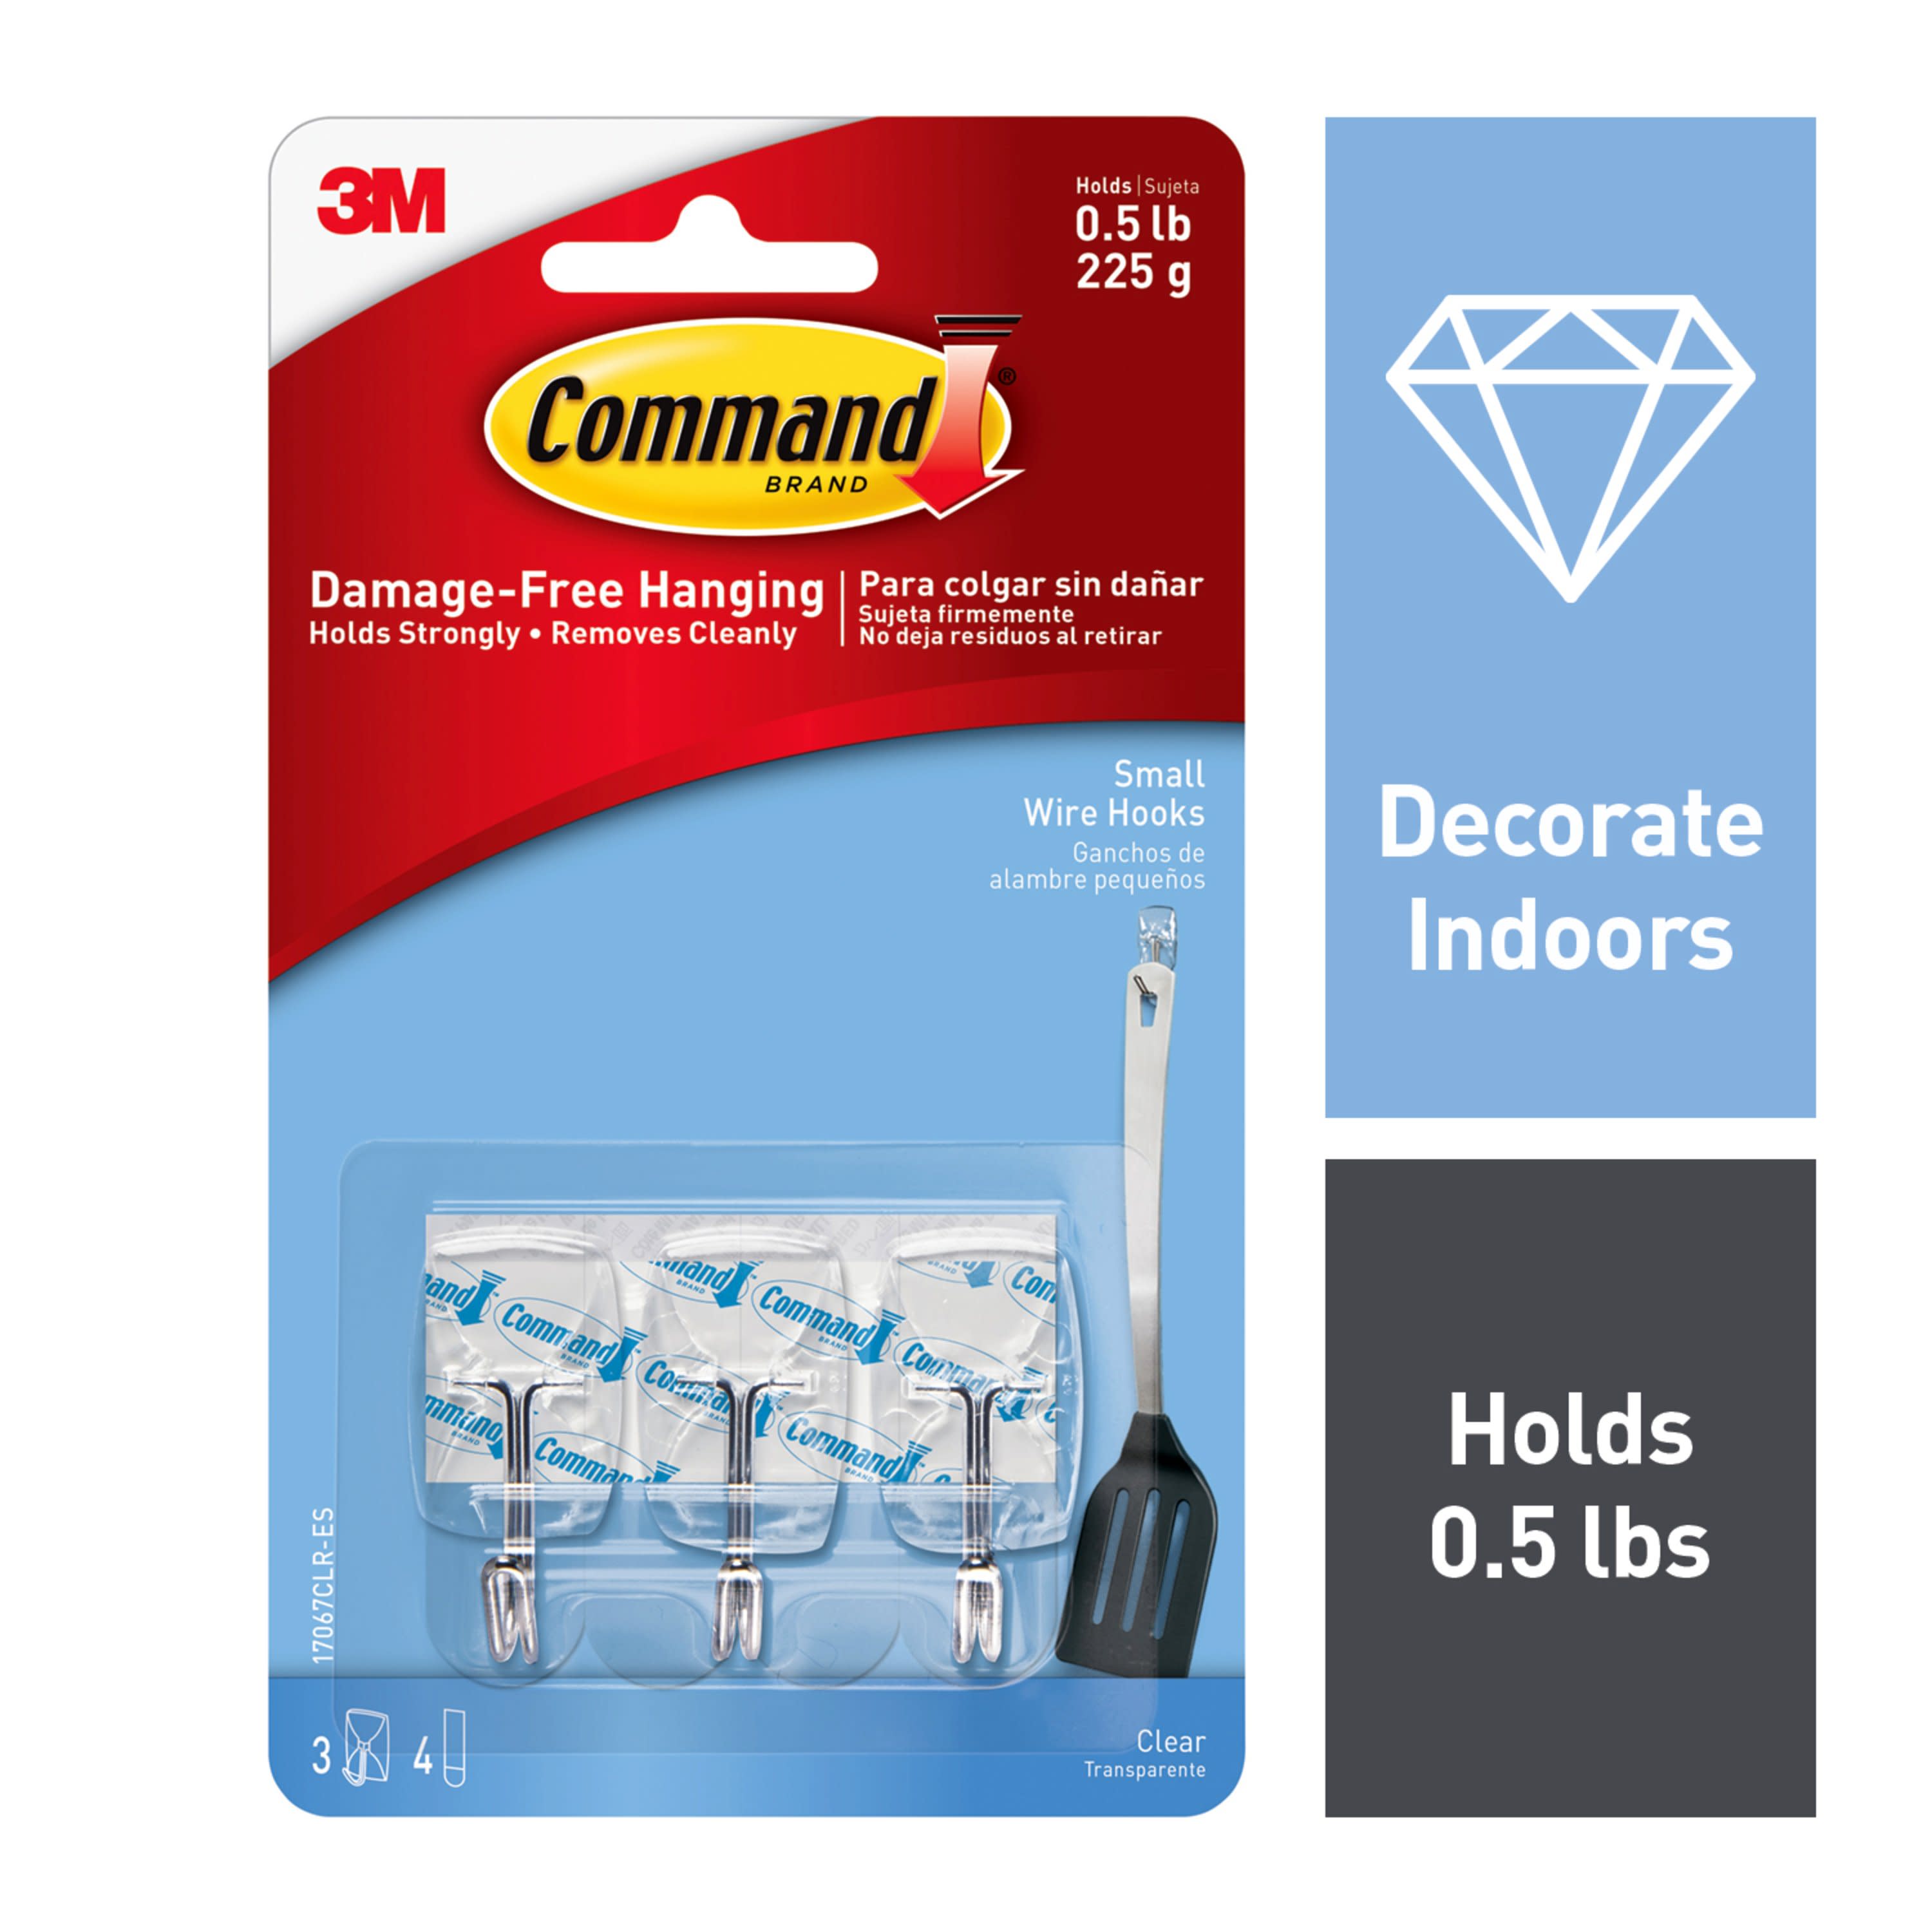 Command Small Wire Hooks, White, Holds up to 0.5 lbs, 4-Hooks, 5-Strips